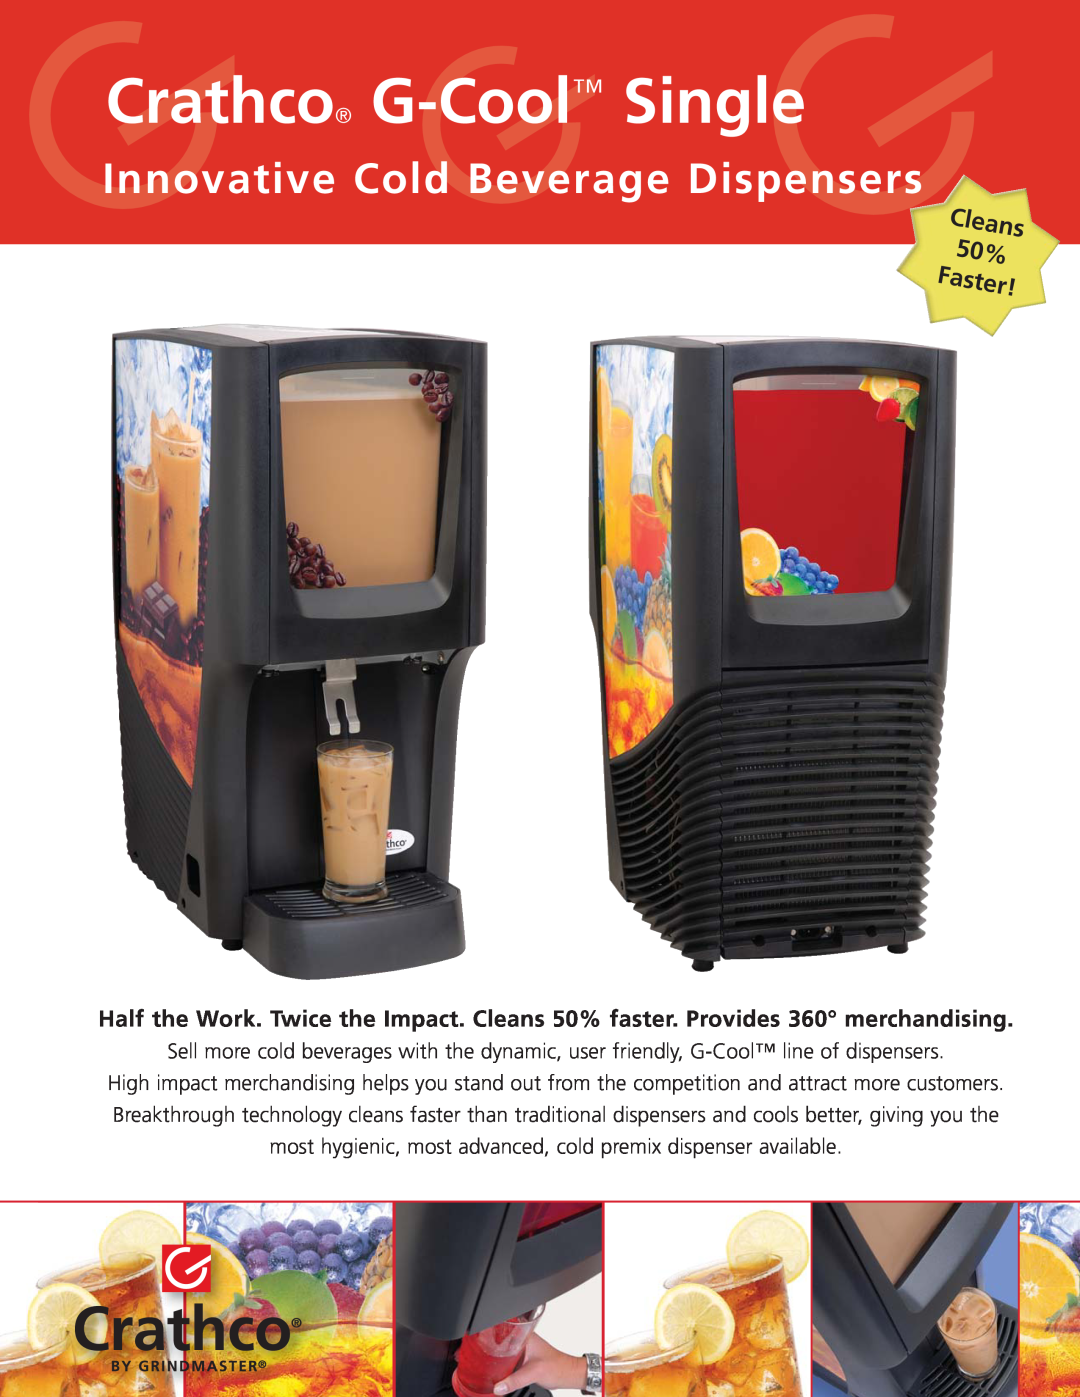 Grindmaster C-1S manual Crathco G-Cool Single, Innovative Cold Beverage Dispensers, Cleans 50% Faster 